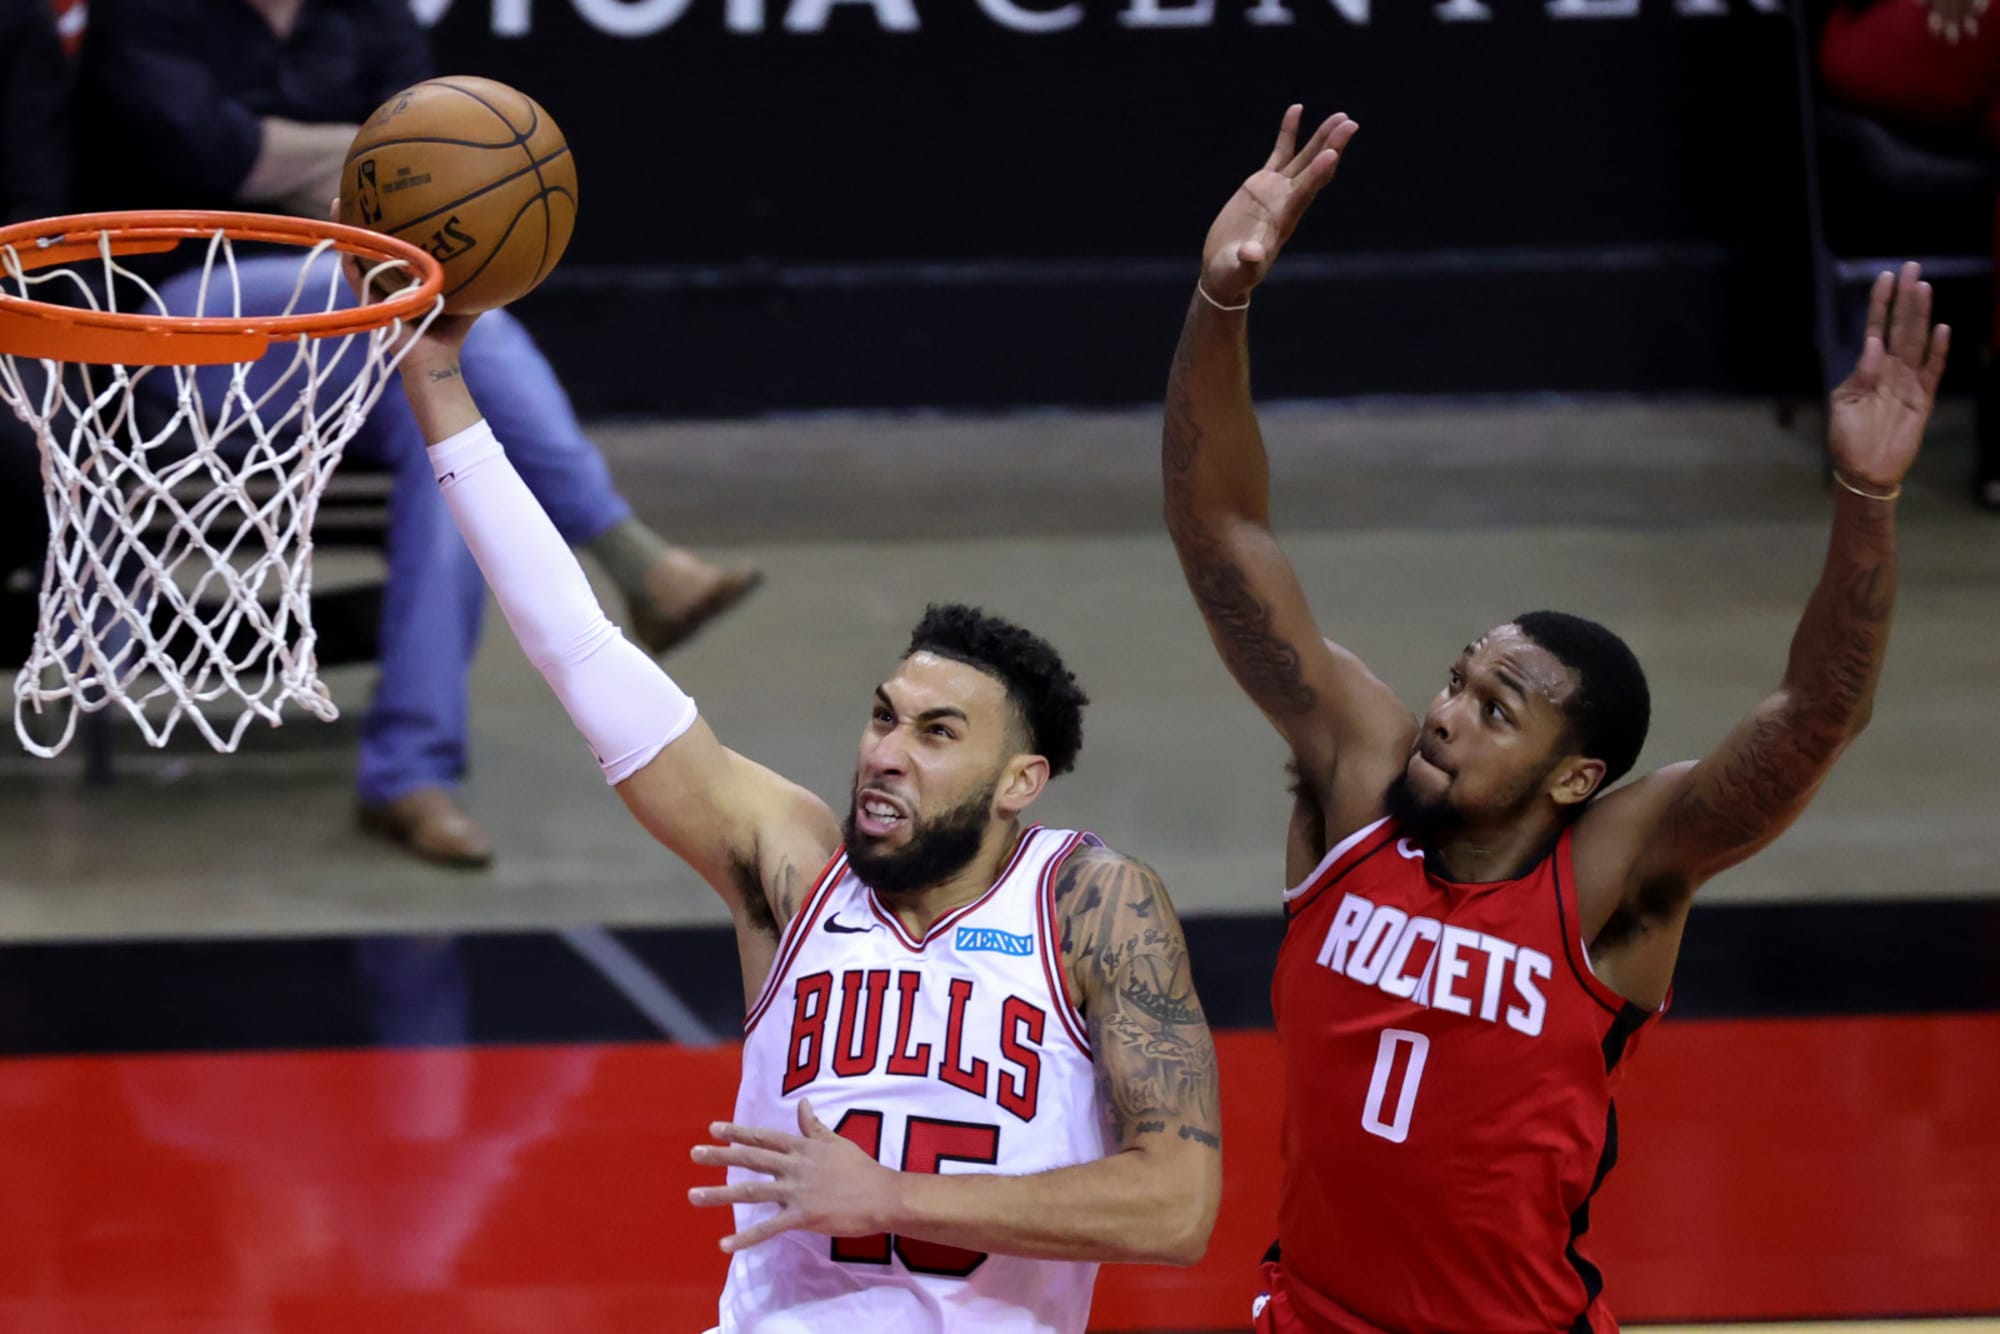 Chicago Bulls Playoff hope alive after dominant win over Rockets